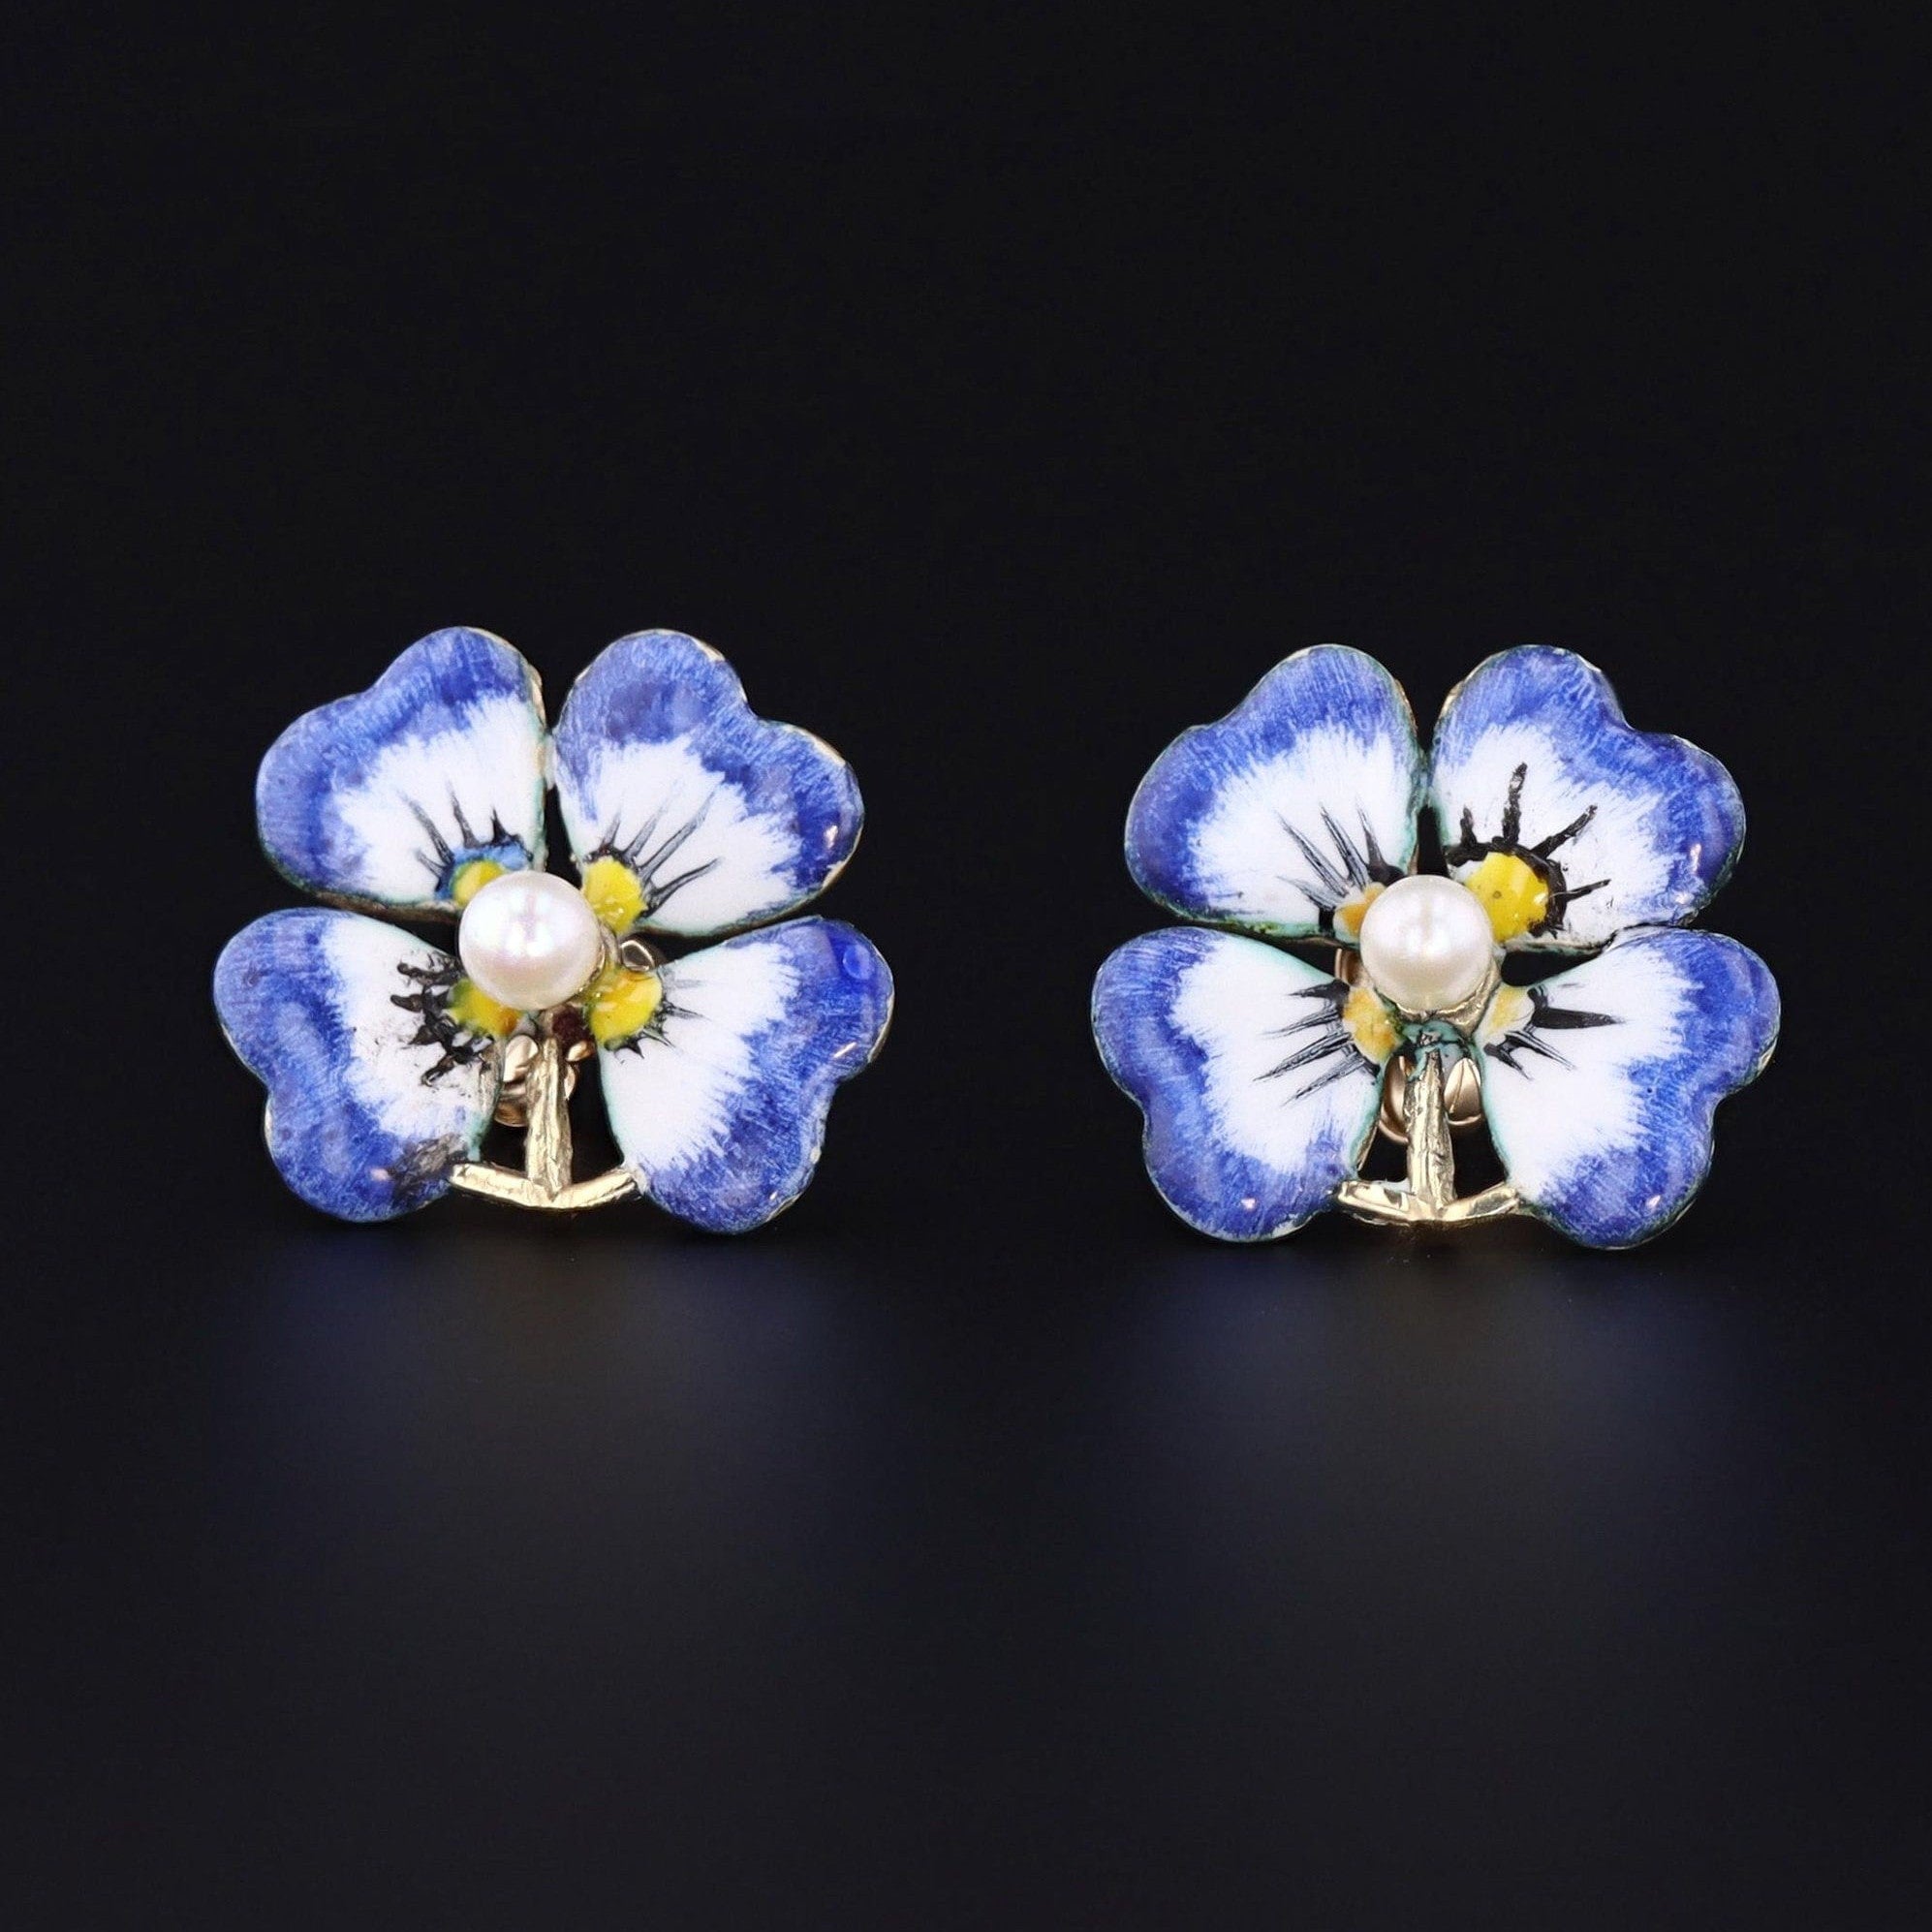 Antique Enamel and Pearl Pansy Earrings 14k Gold